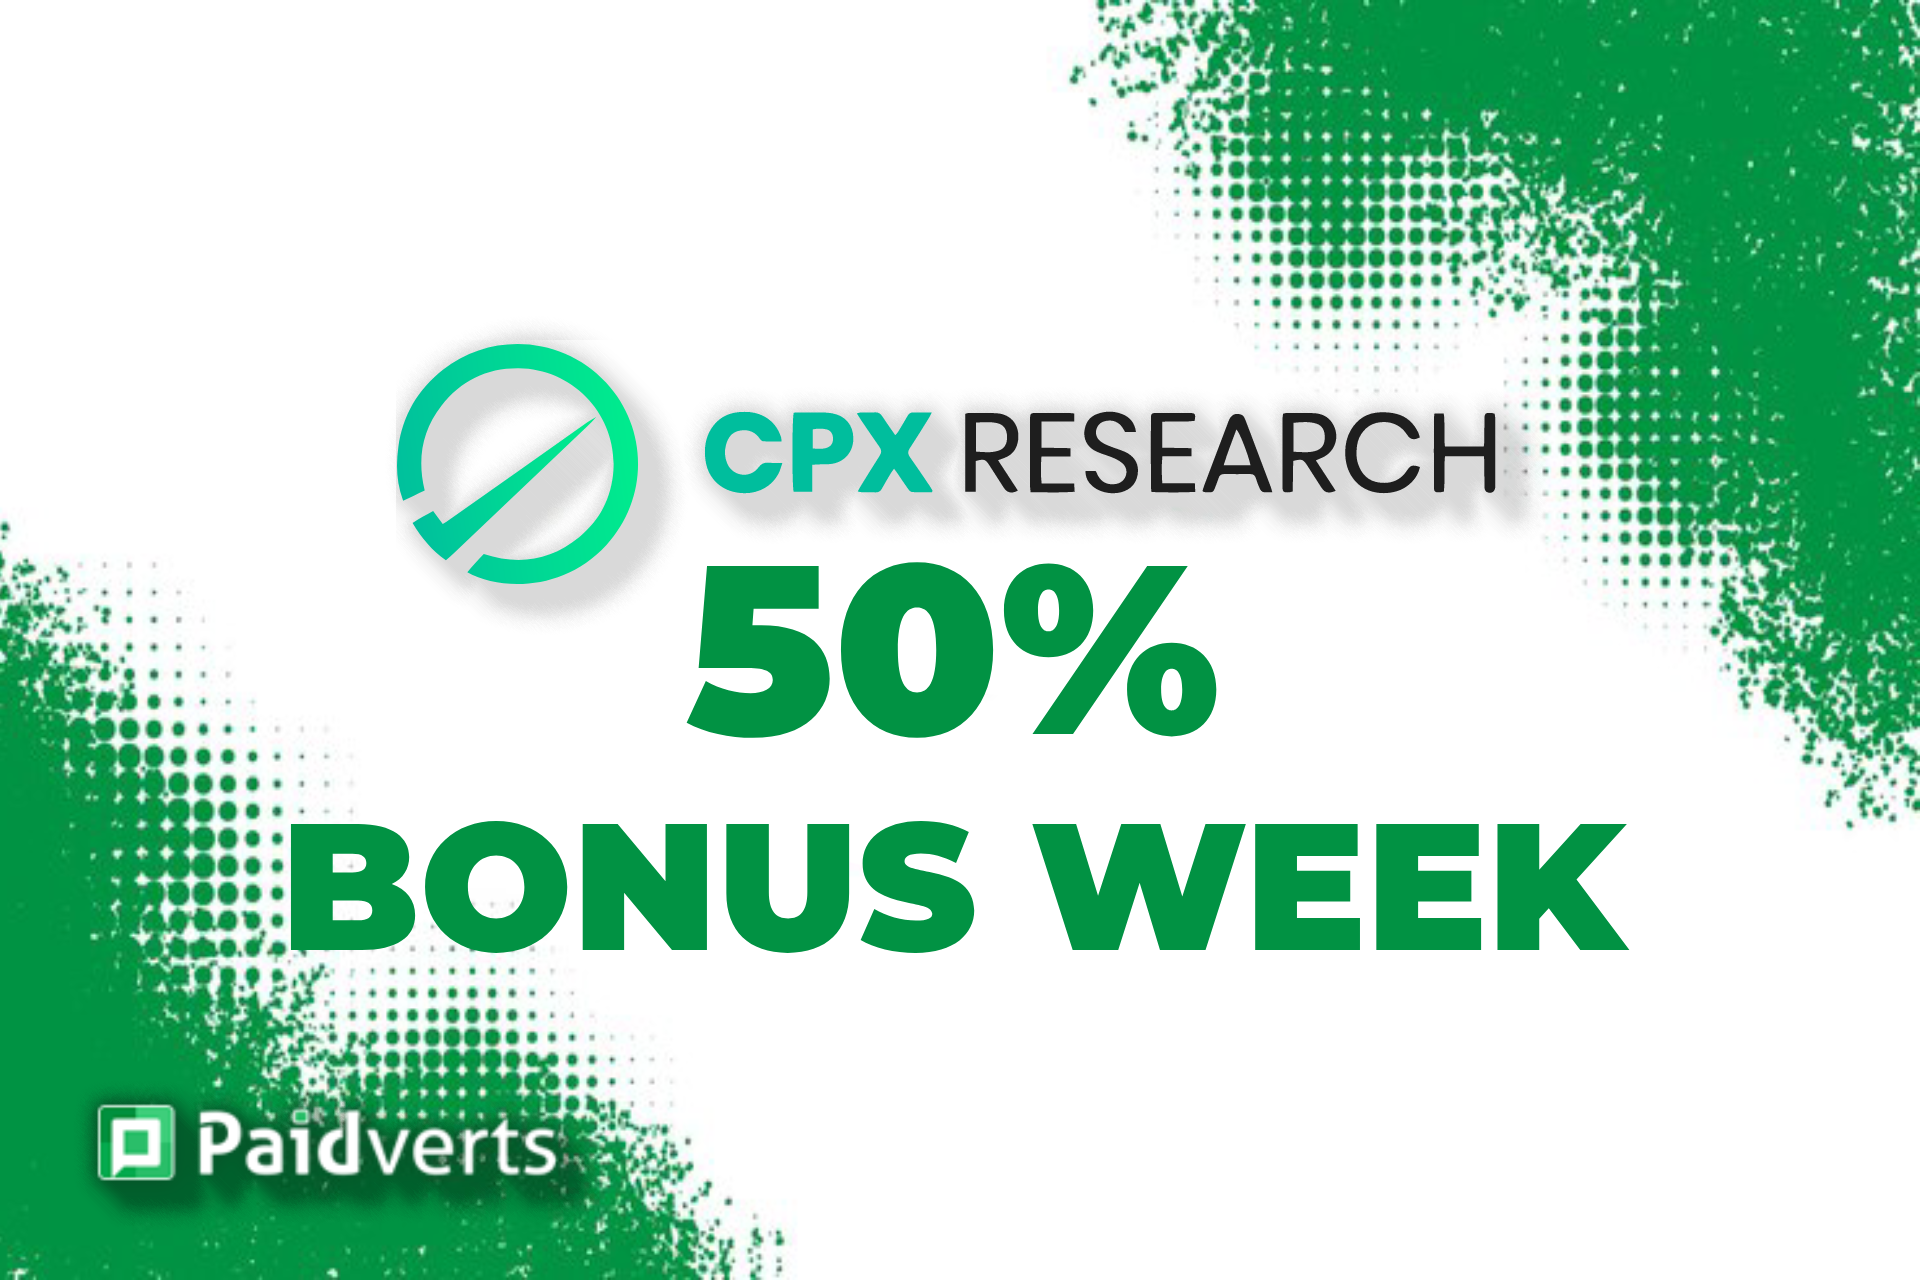 Boost Your Earnings: Paidverts’ Exclusive 50% Bonus Week with CPX Research!